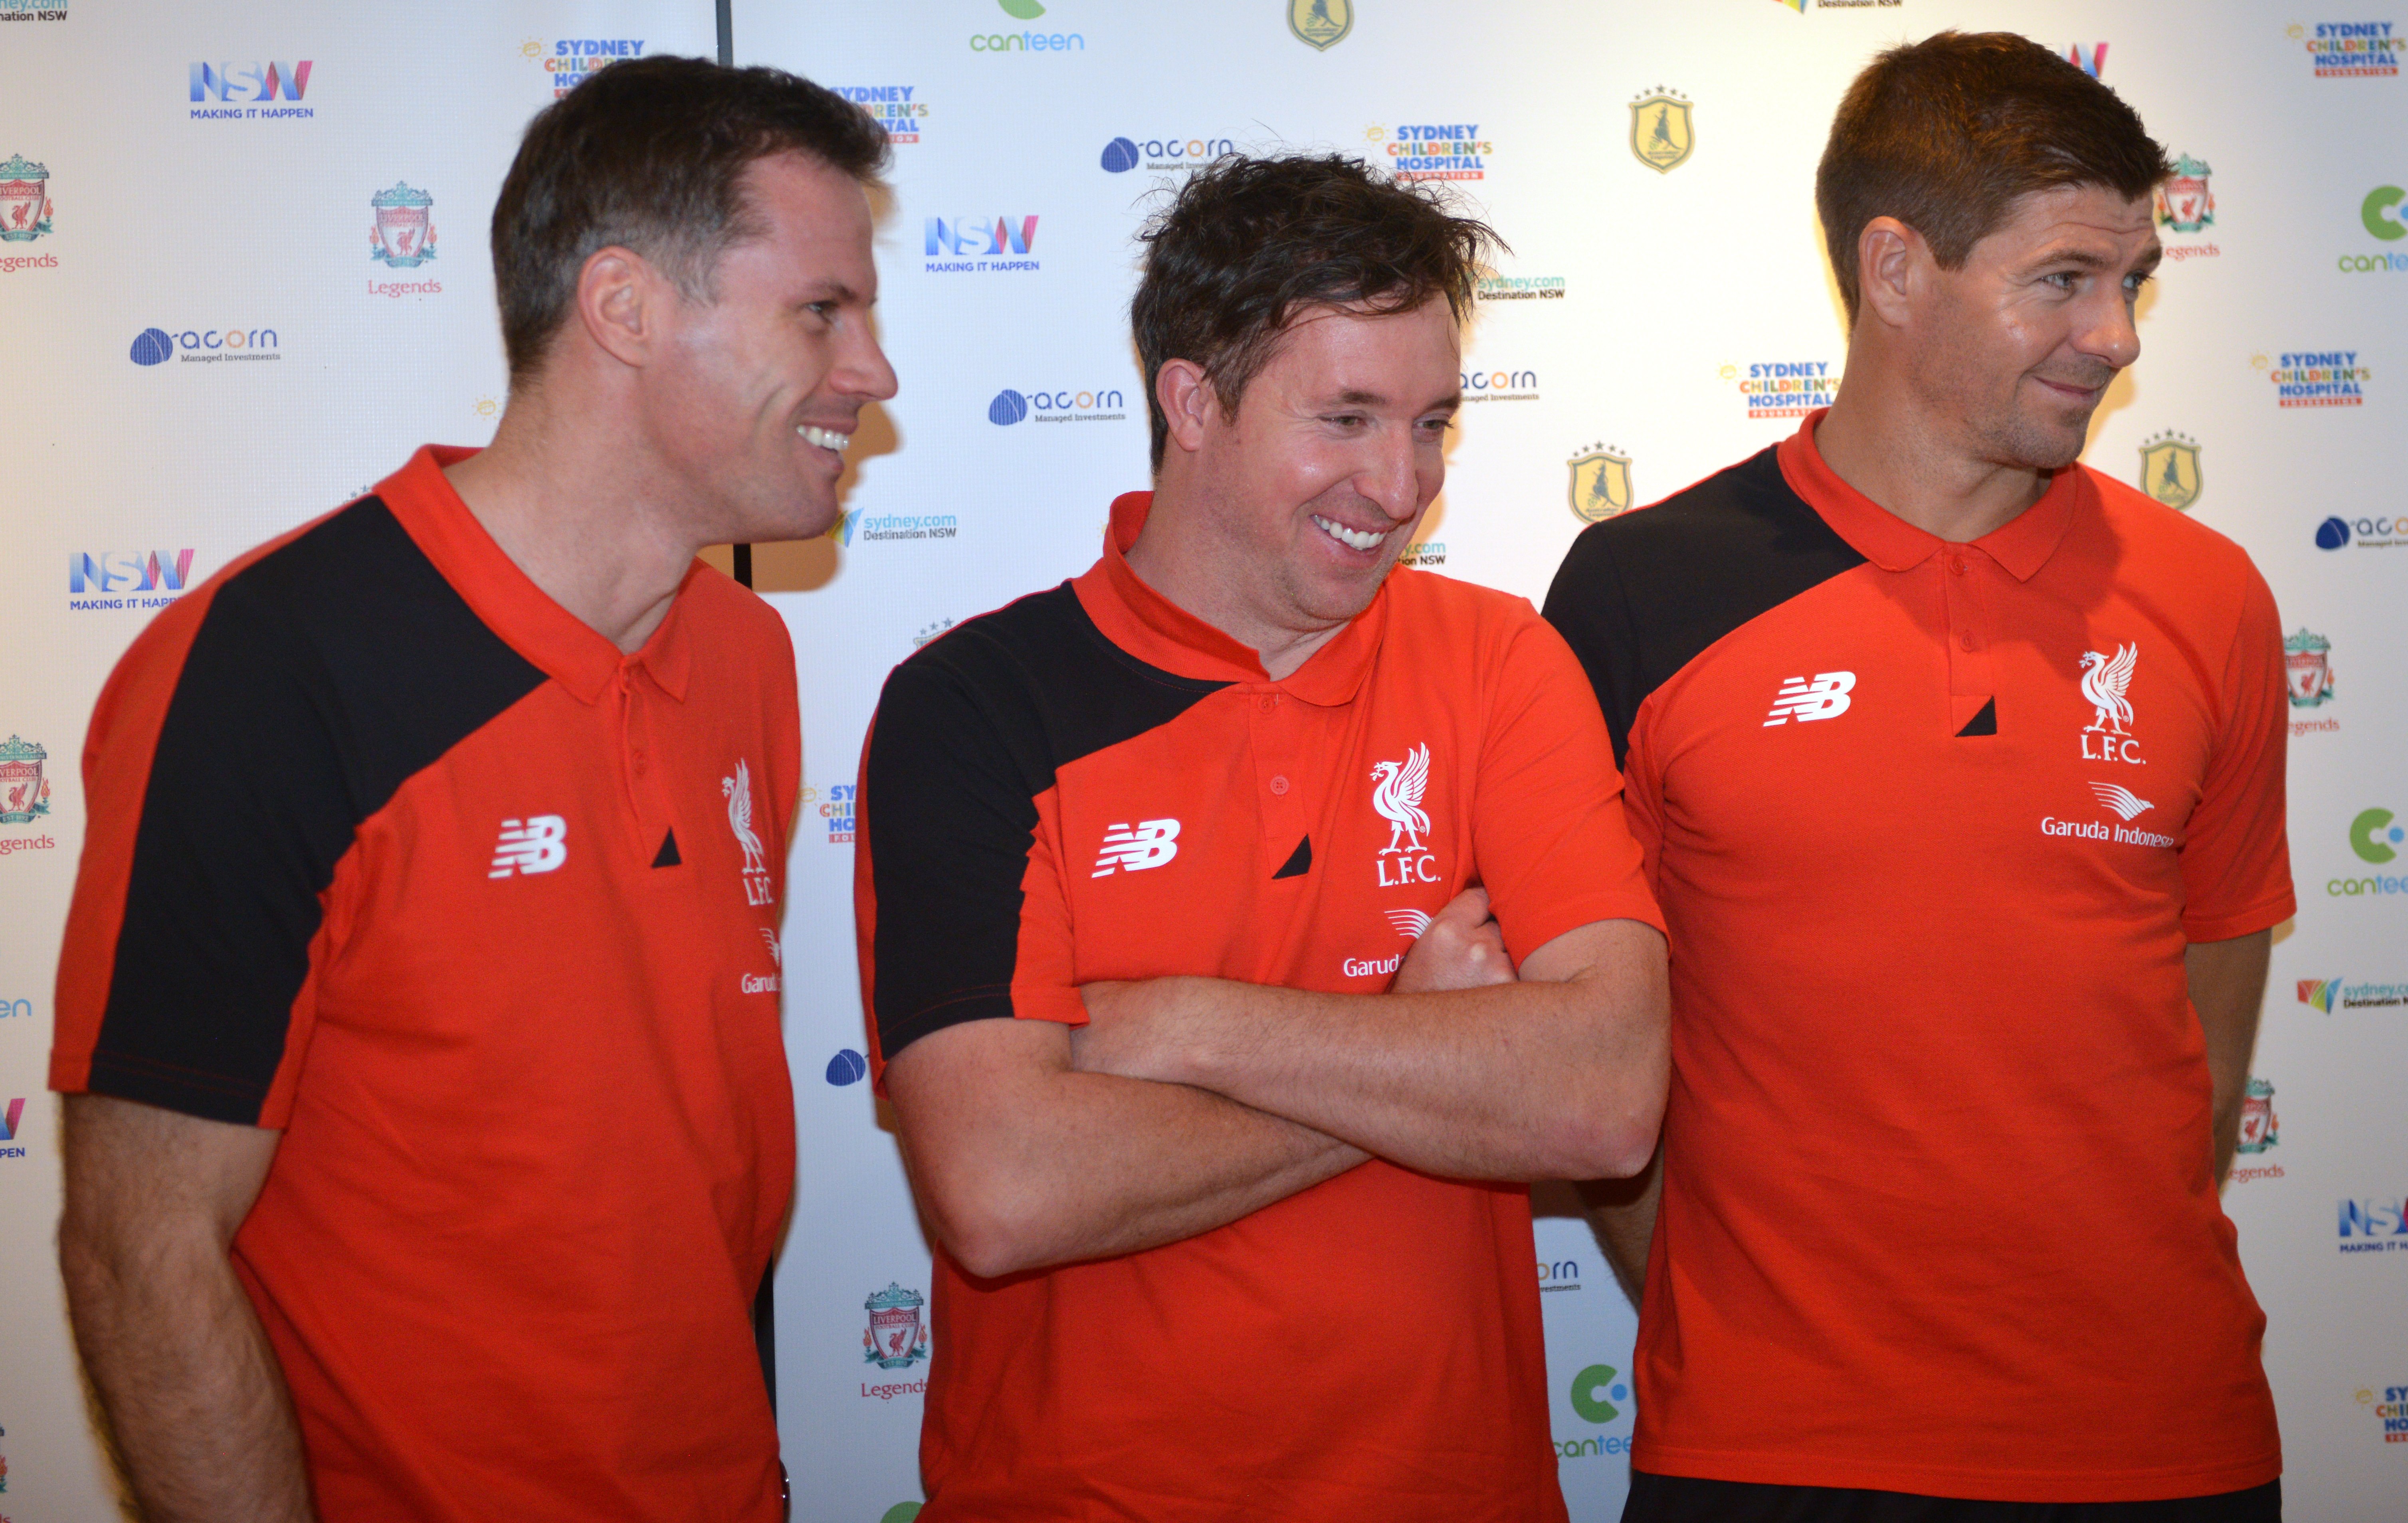 Former Liverpool football stars Steven Gerrard (R) Jamie Carragher (L) and Robbie Fowler (C) attend a press conference in Sydney on January 6, 2016.  Gerrard will pull on the famous Reds shirt once again when he plays for the club's 'Legends' side with Carragher and Fowler against Australia Legends in Sydney on January 7, 2016. AFP PHOTO / Peter PARKS  IMAGE STRICTLY FOR EDITORIAL USE - STRICTLY NO COMMERCIAL USE / AFP / PETER PARKS        (Photo credit should read PETER PARKS/AFP/Getty Images)